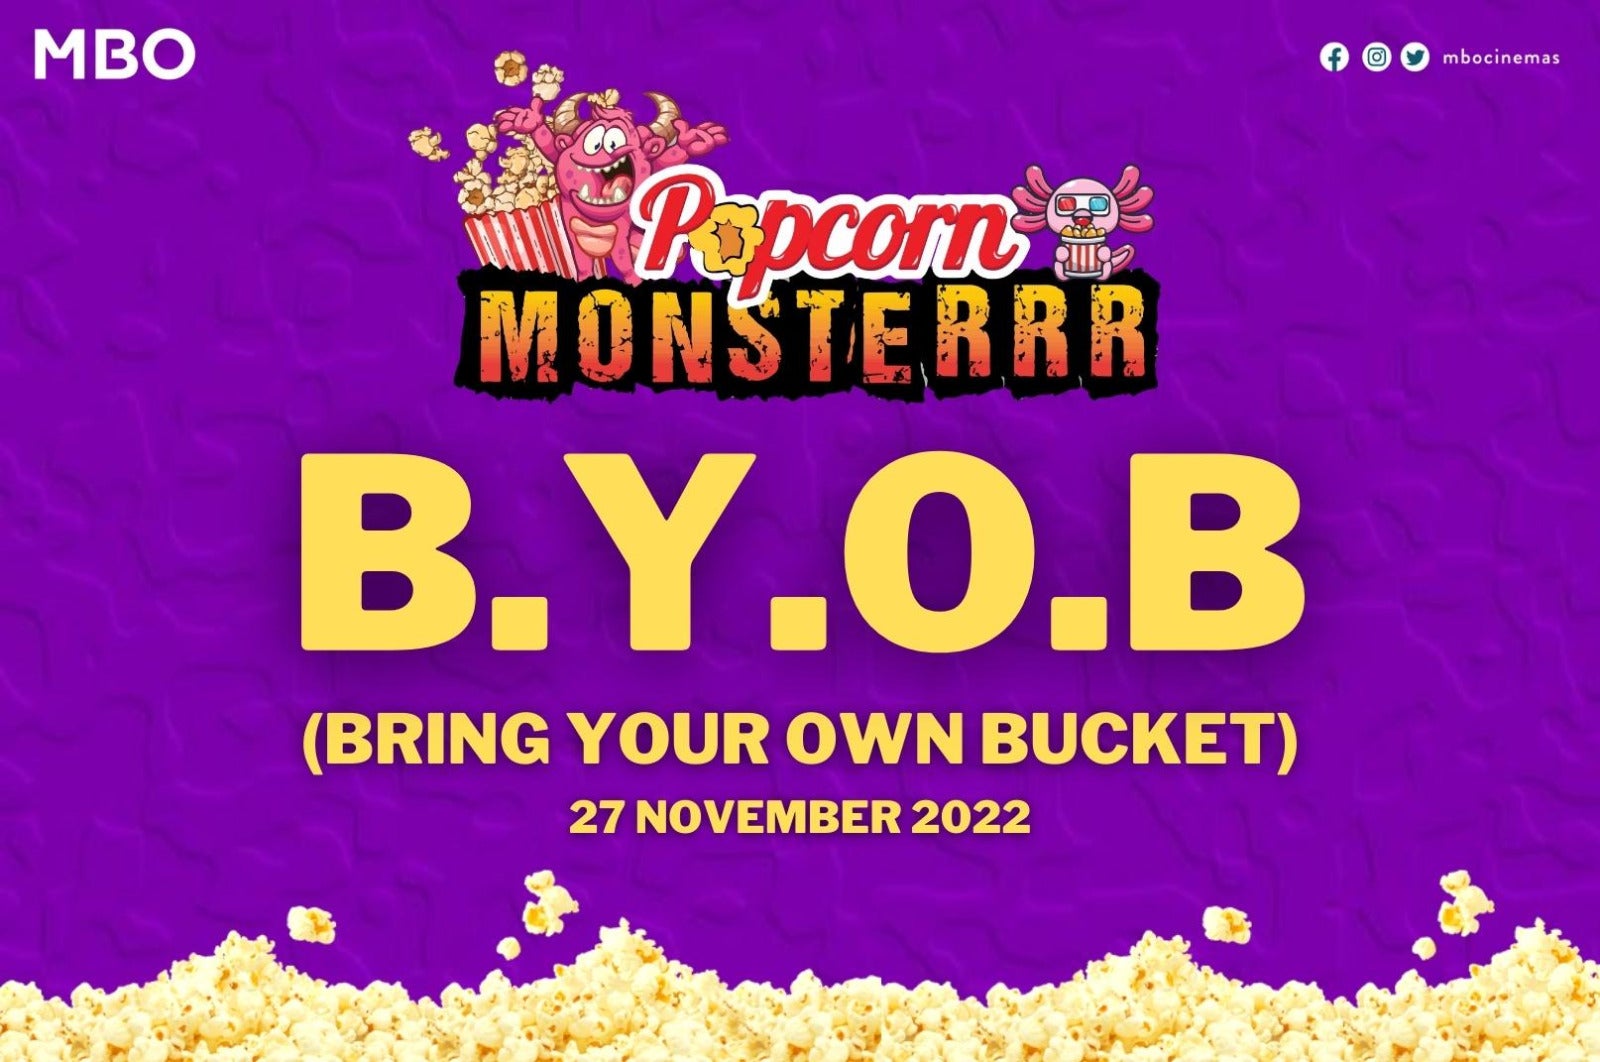 MBO Cinema Bring Your Own Bucket Popcorn Monsterrr scaled